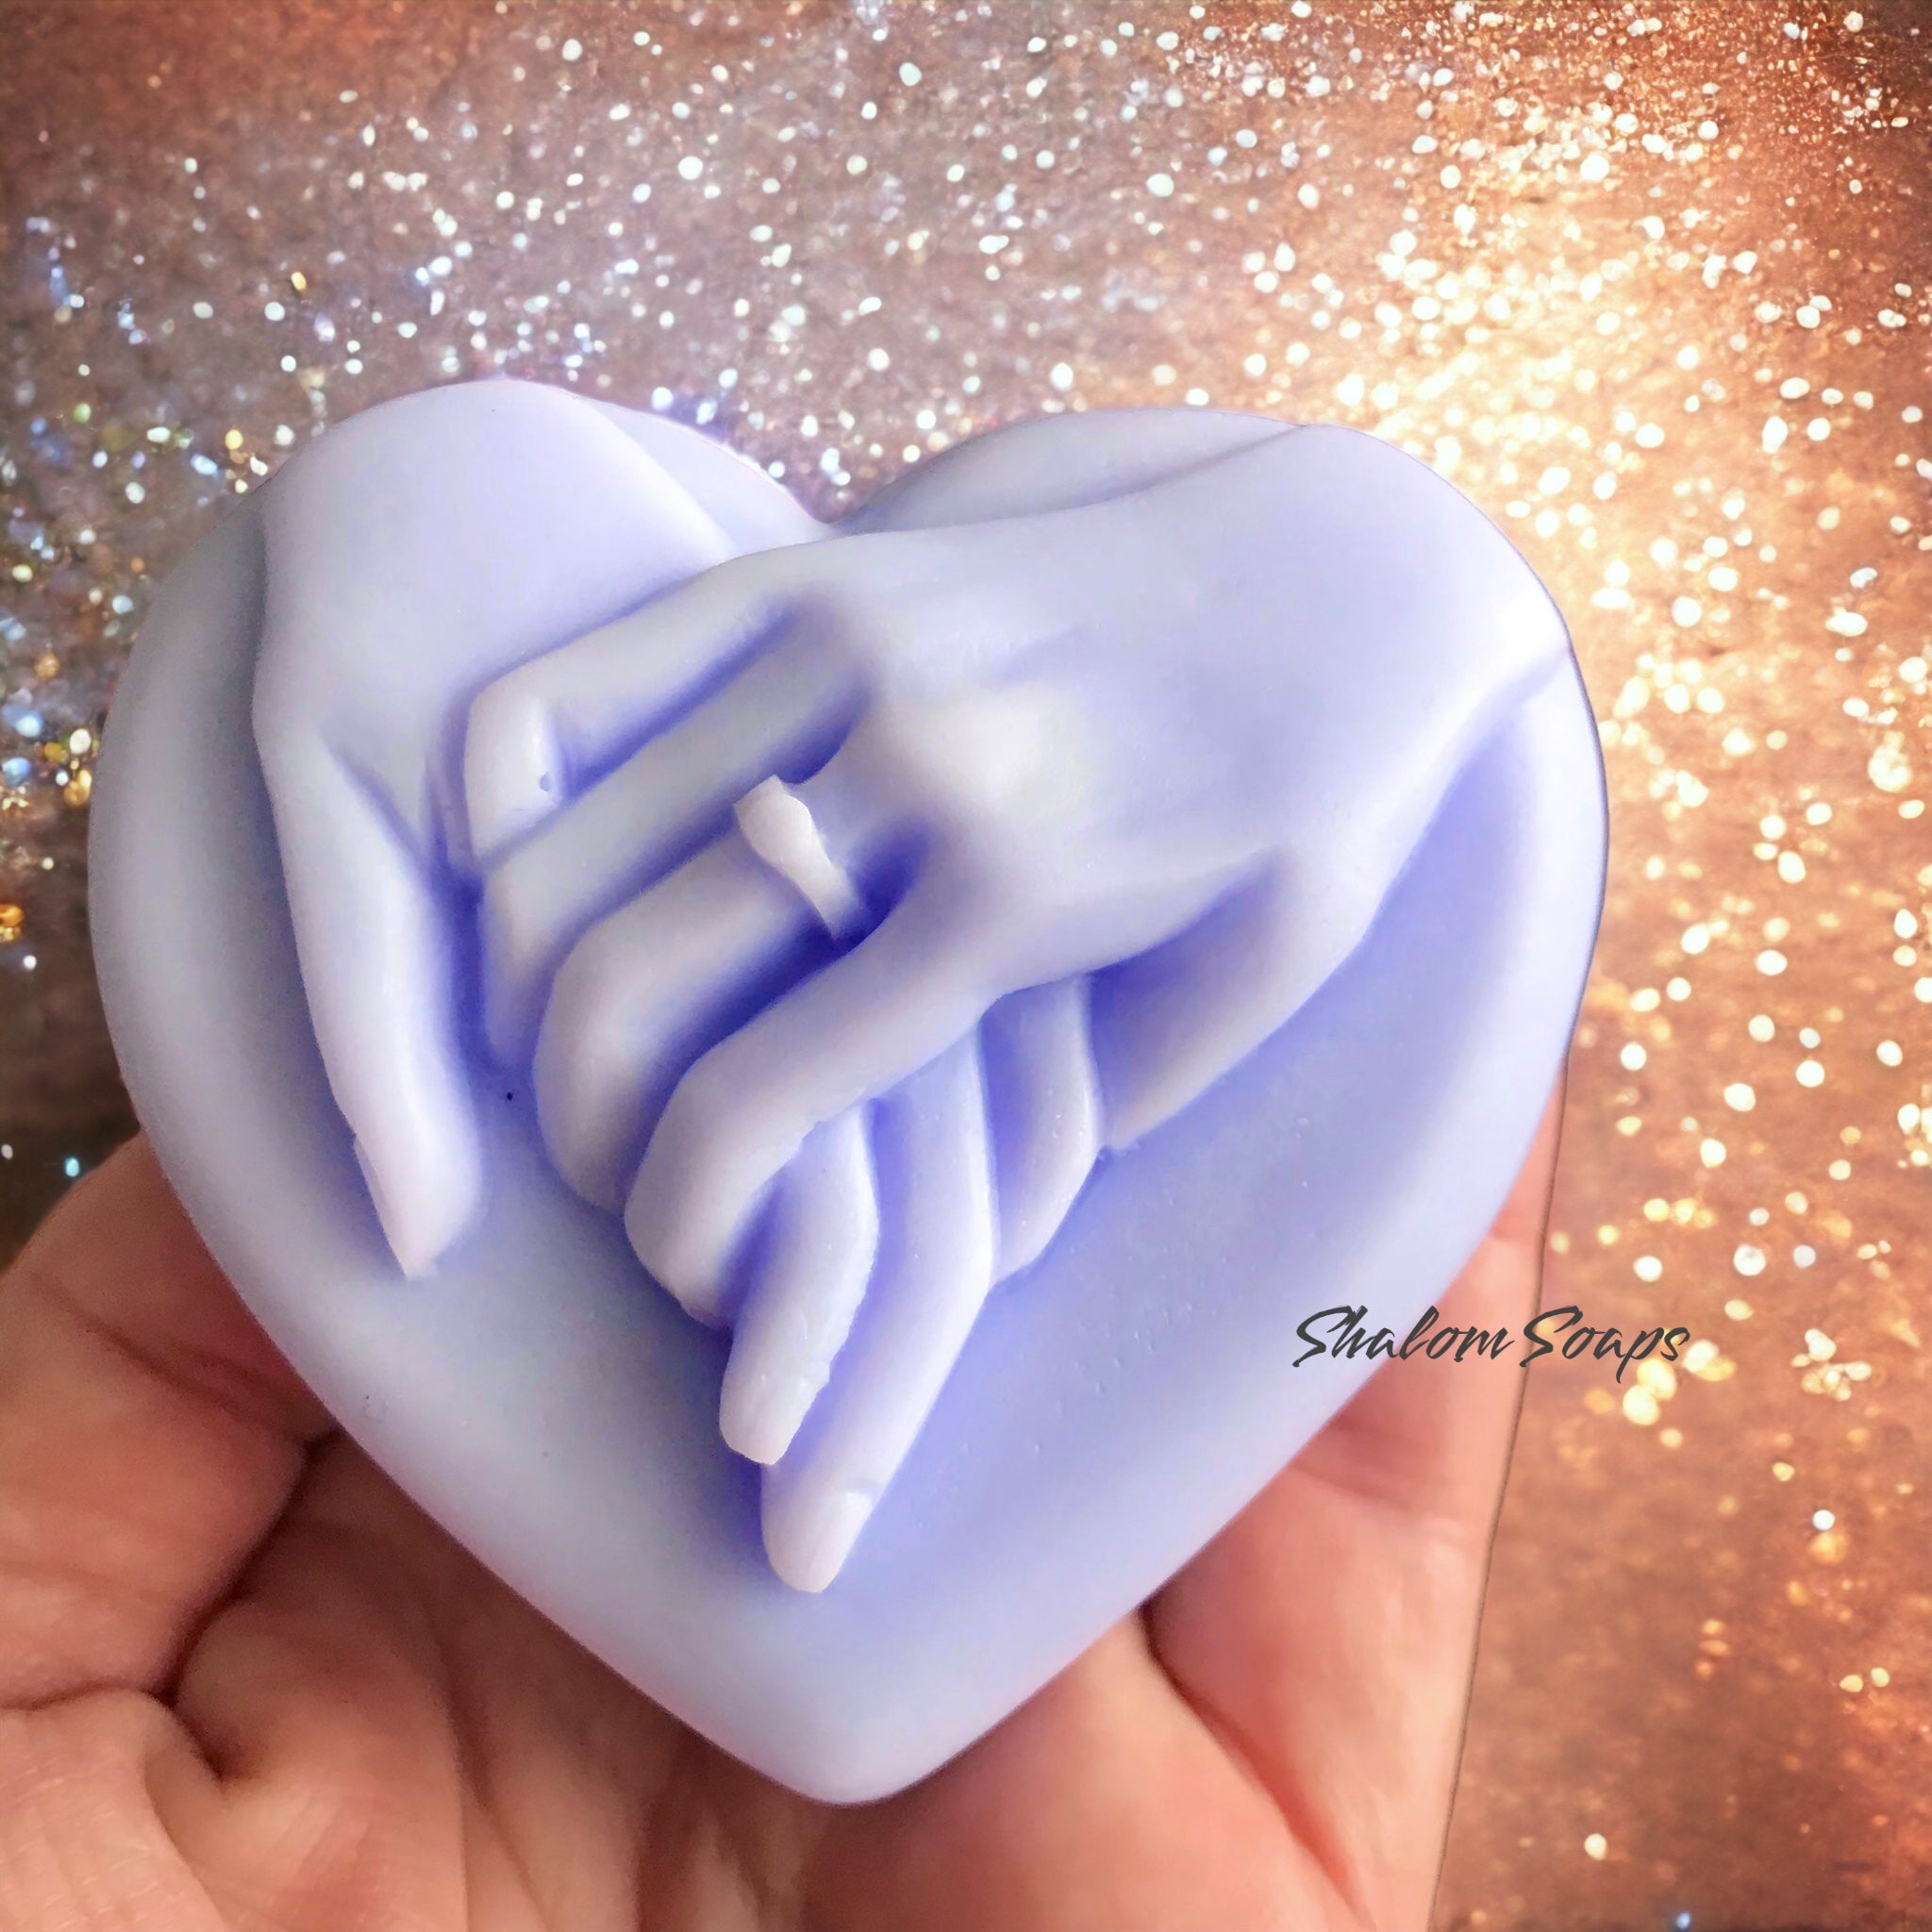 Holding Hands Heart Soap